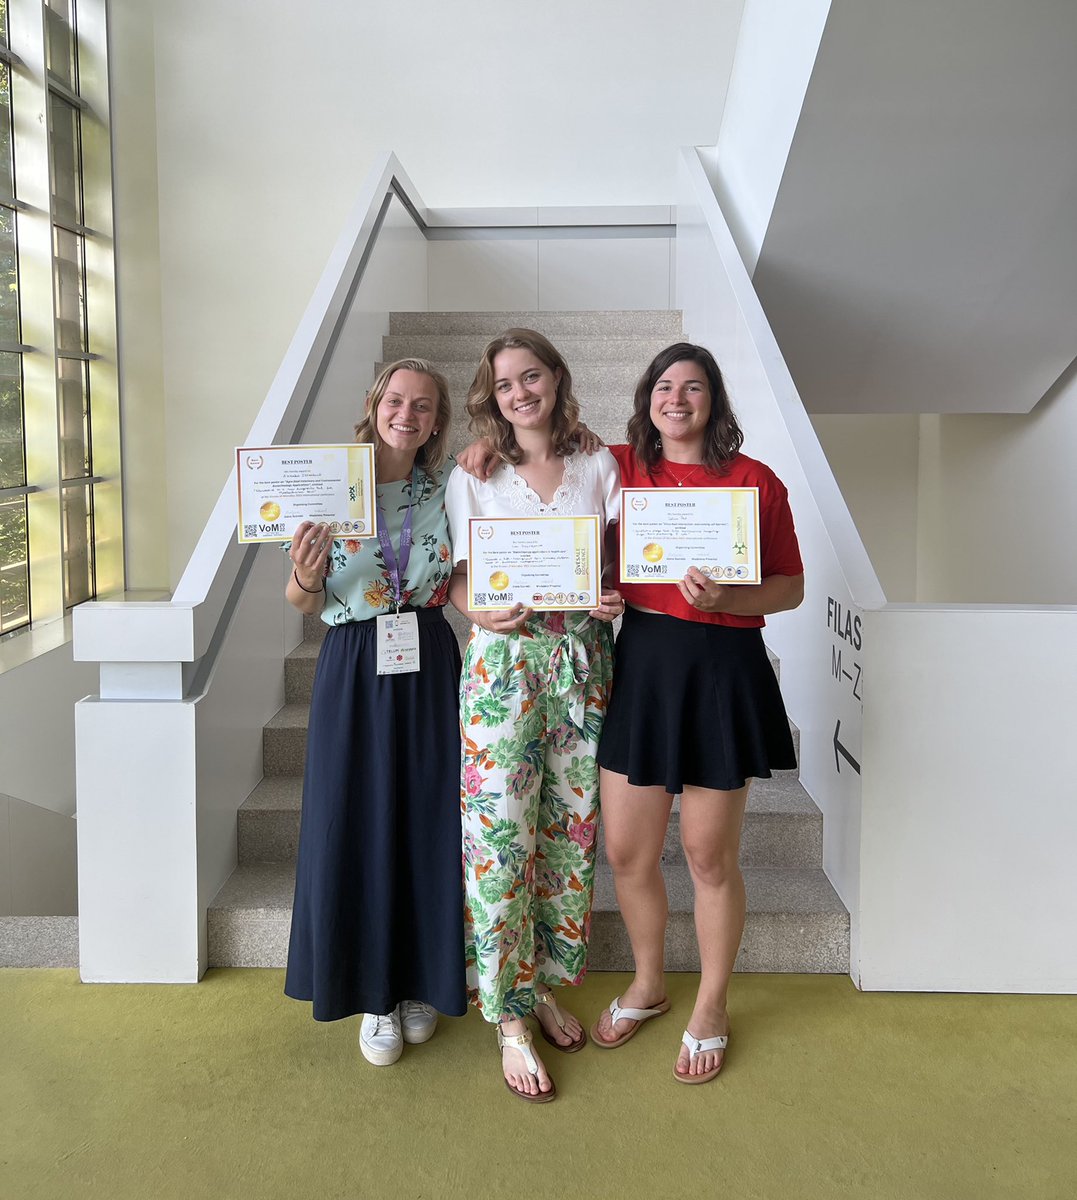 Three of the BSVoM members got ‘Best Poster’ awards tonight at the @VoM_2022 conference! 🤩 Congratulations girls!